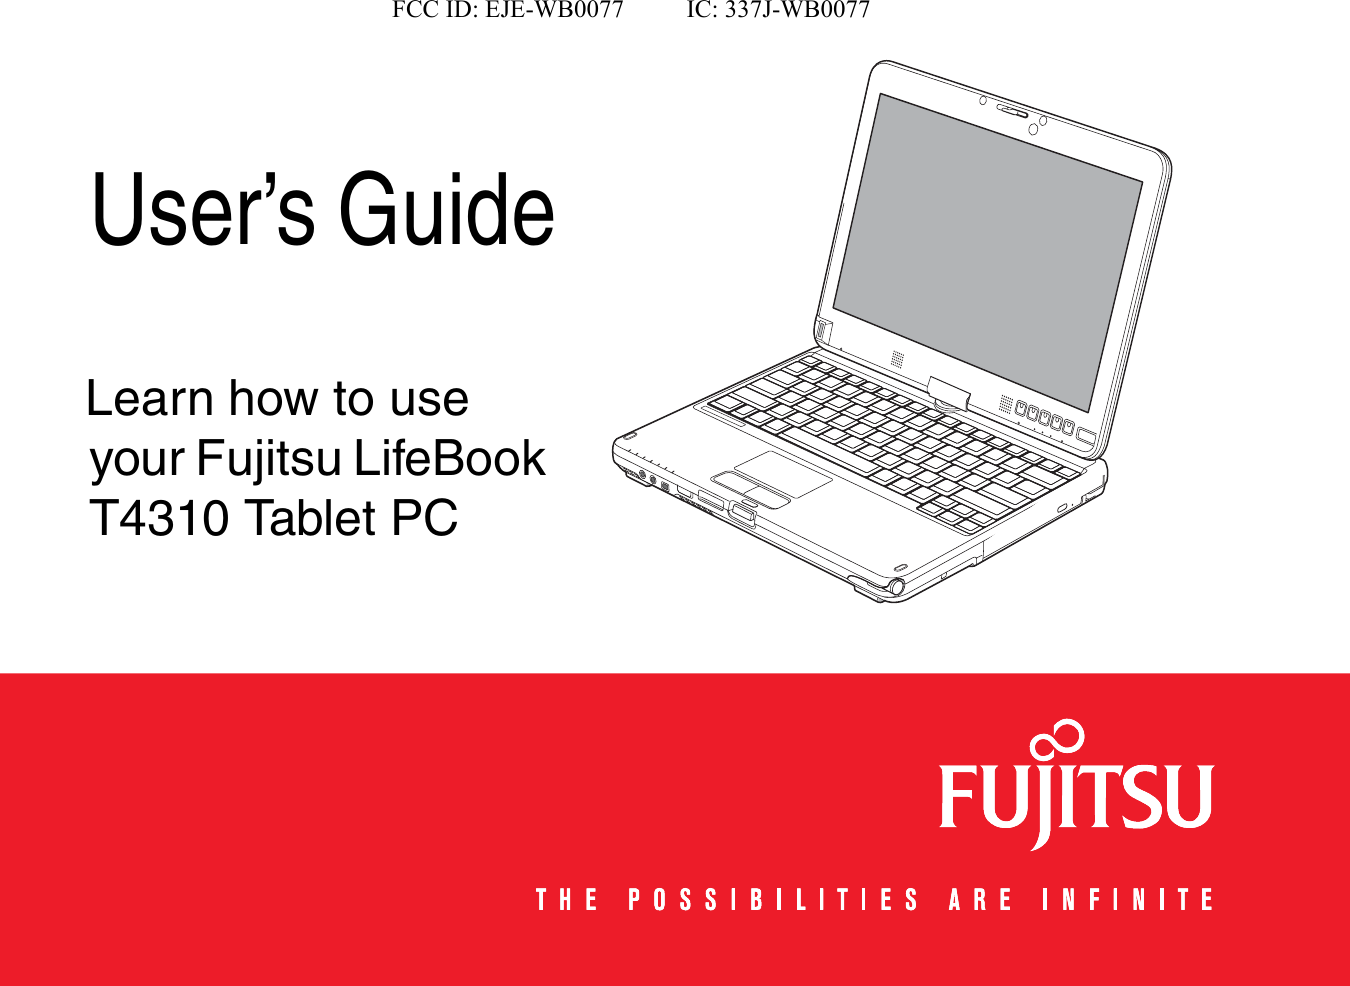                      FCC ID: EJE-WB0077          IC: 337J-WB0077 User’s GuideLearn how to use your Fujitsu LifeBook T410 Tablet PC